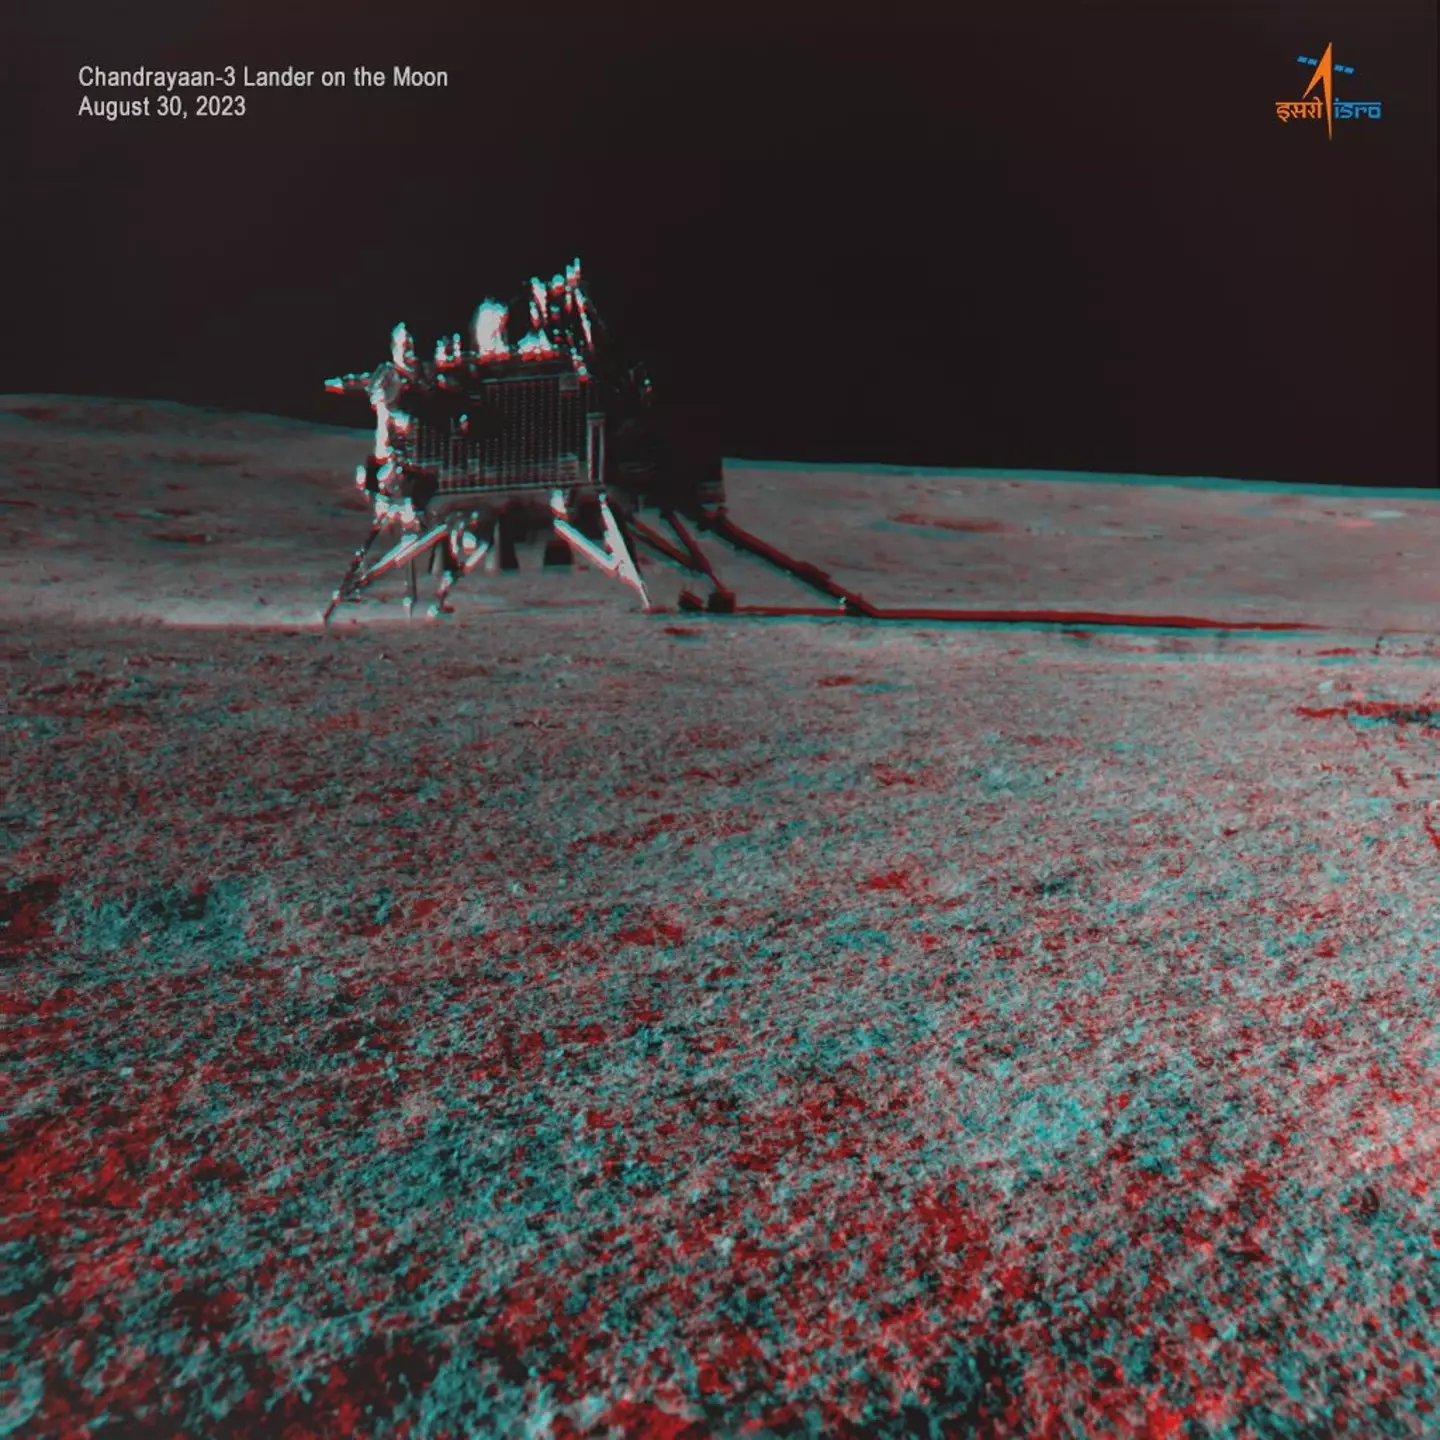 Indian Space Research Organisation's Chandrayaan-3 landed on the moon last month.